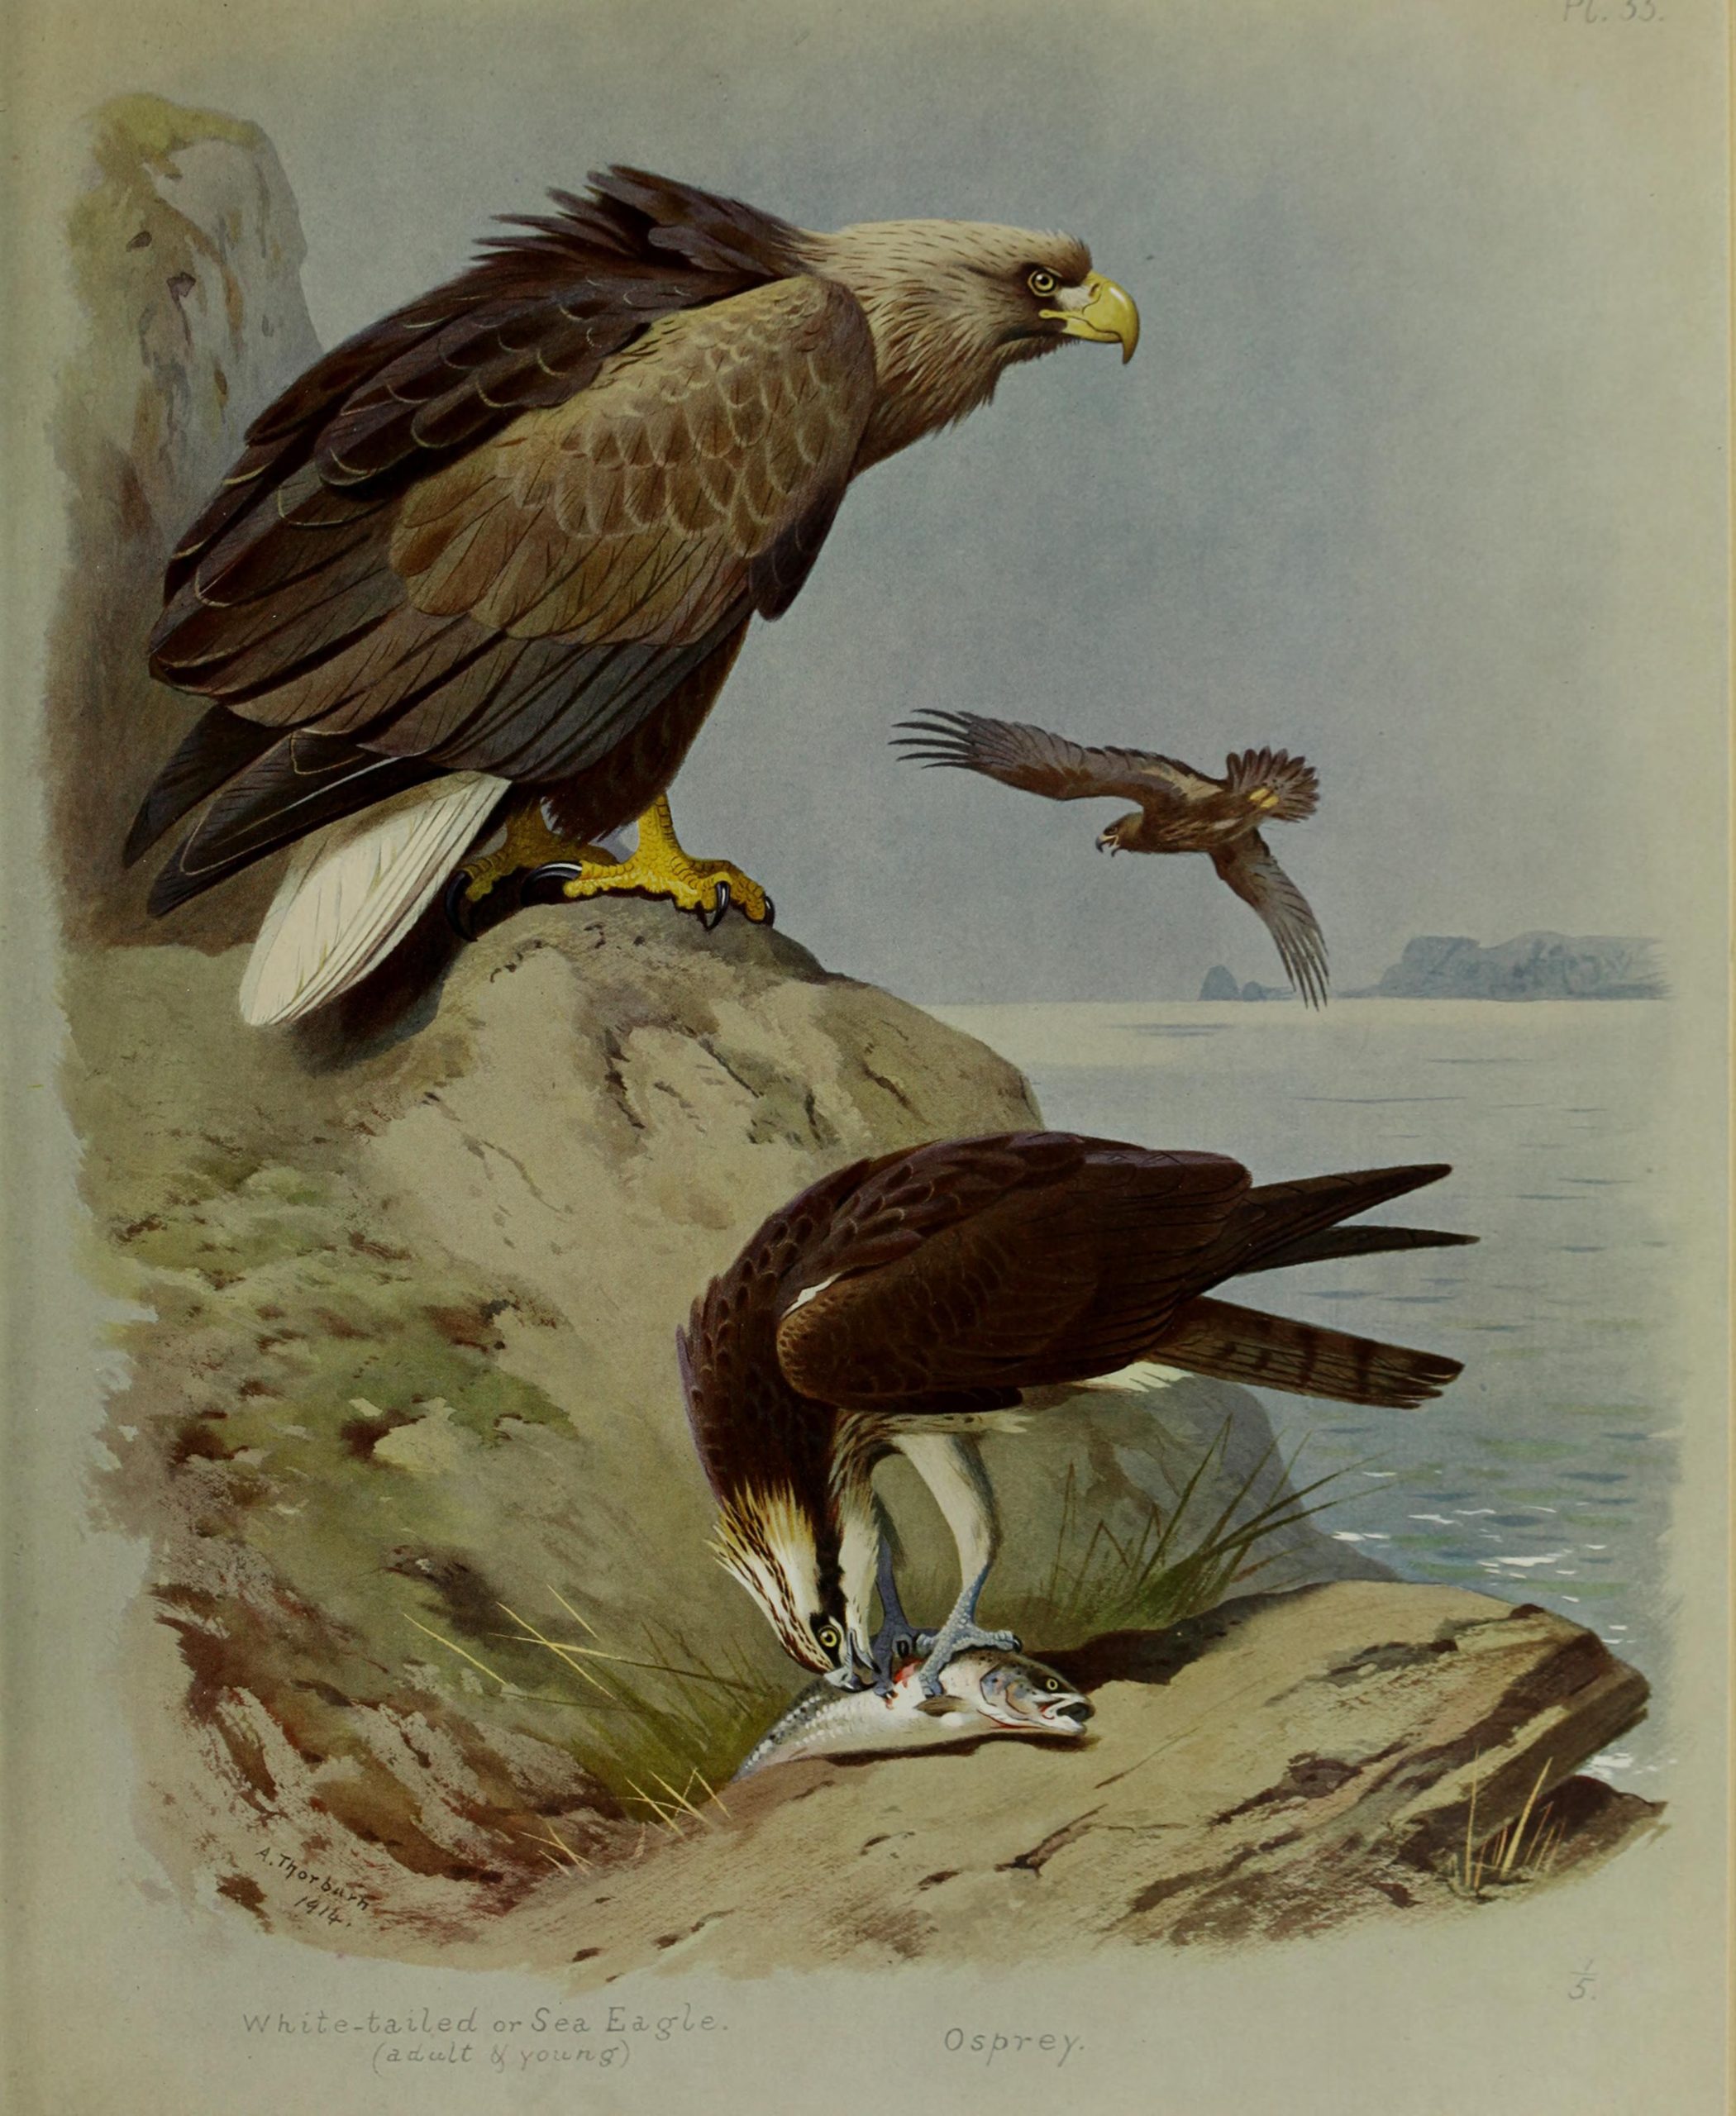 Three eagles on the beach, one devouring a fish